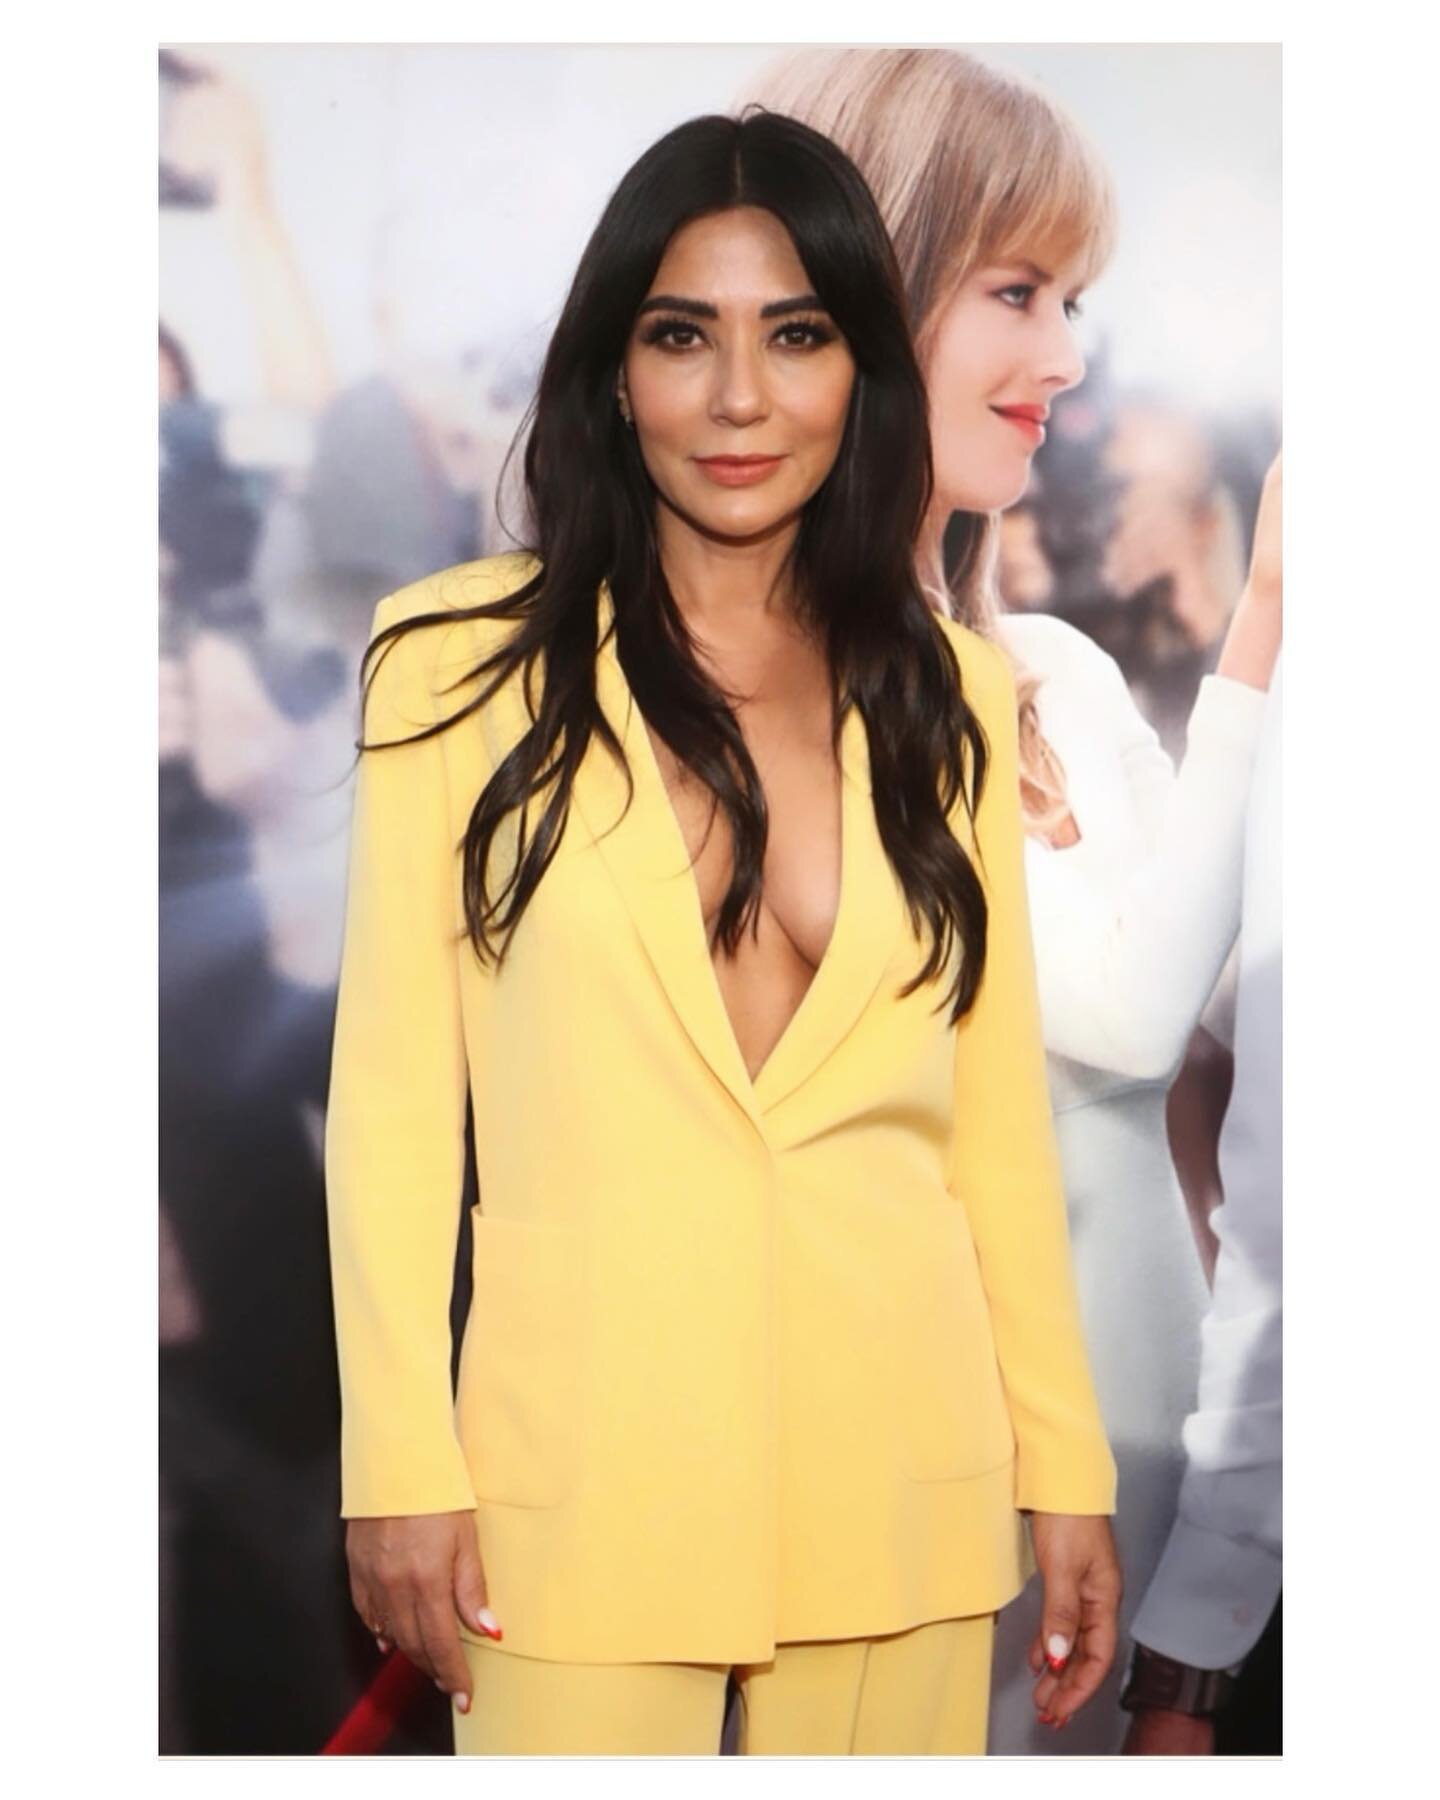 @marisolnichols at the premiere of The Valet in custom suit #styledbyme 
@matteoperin23